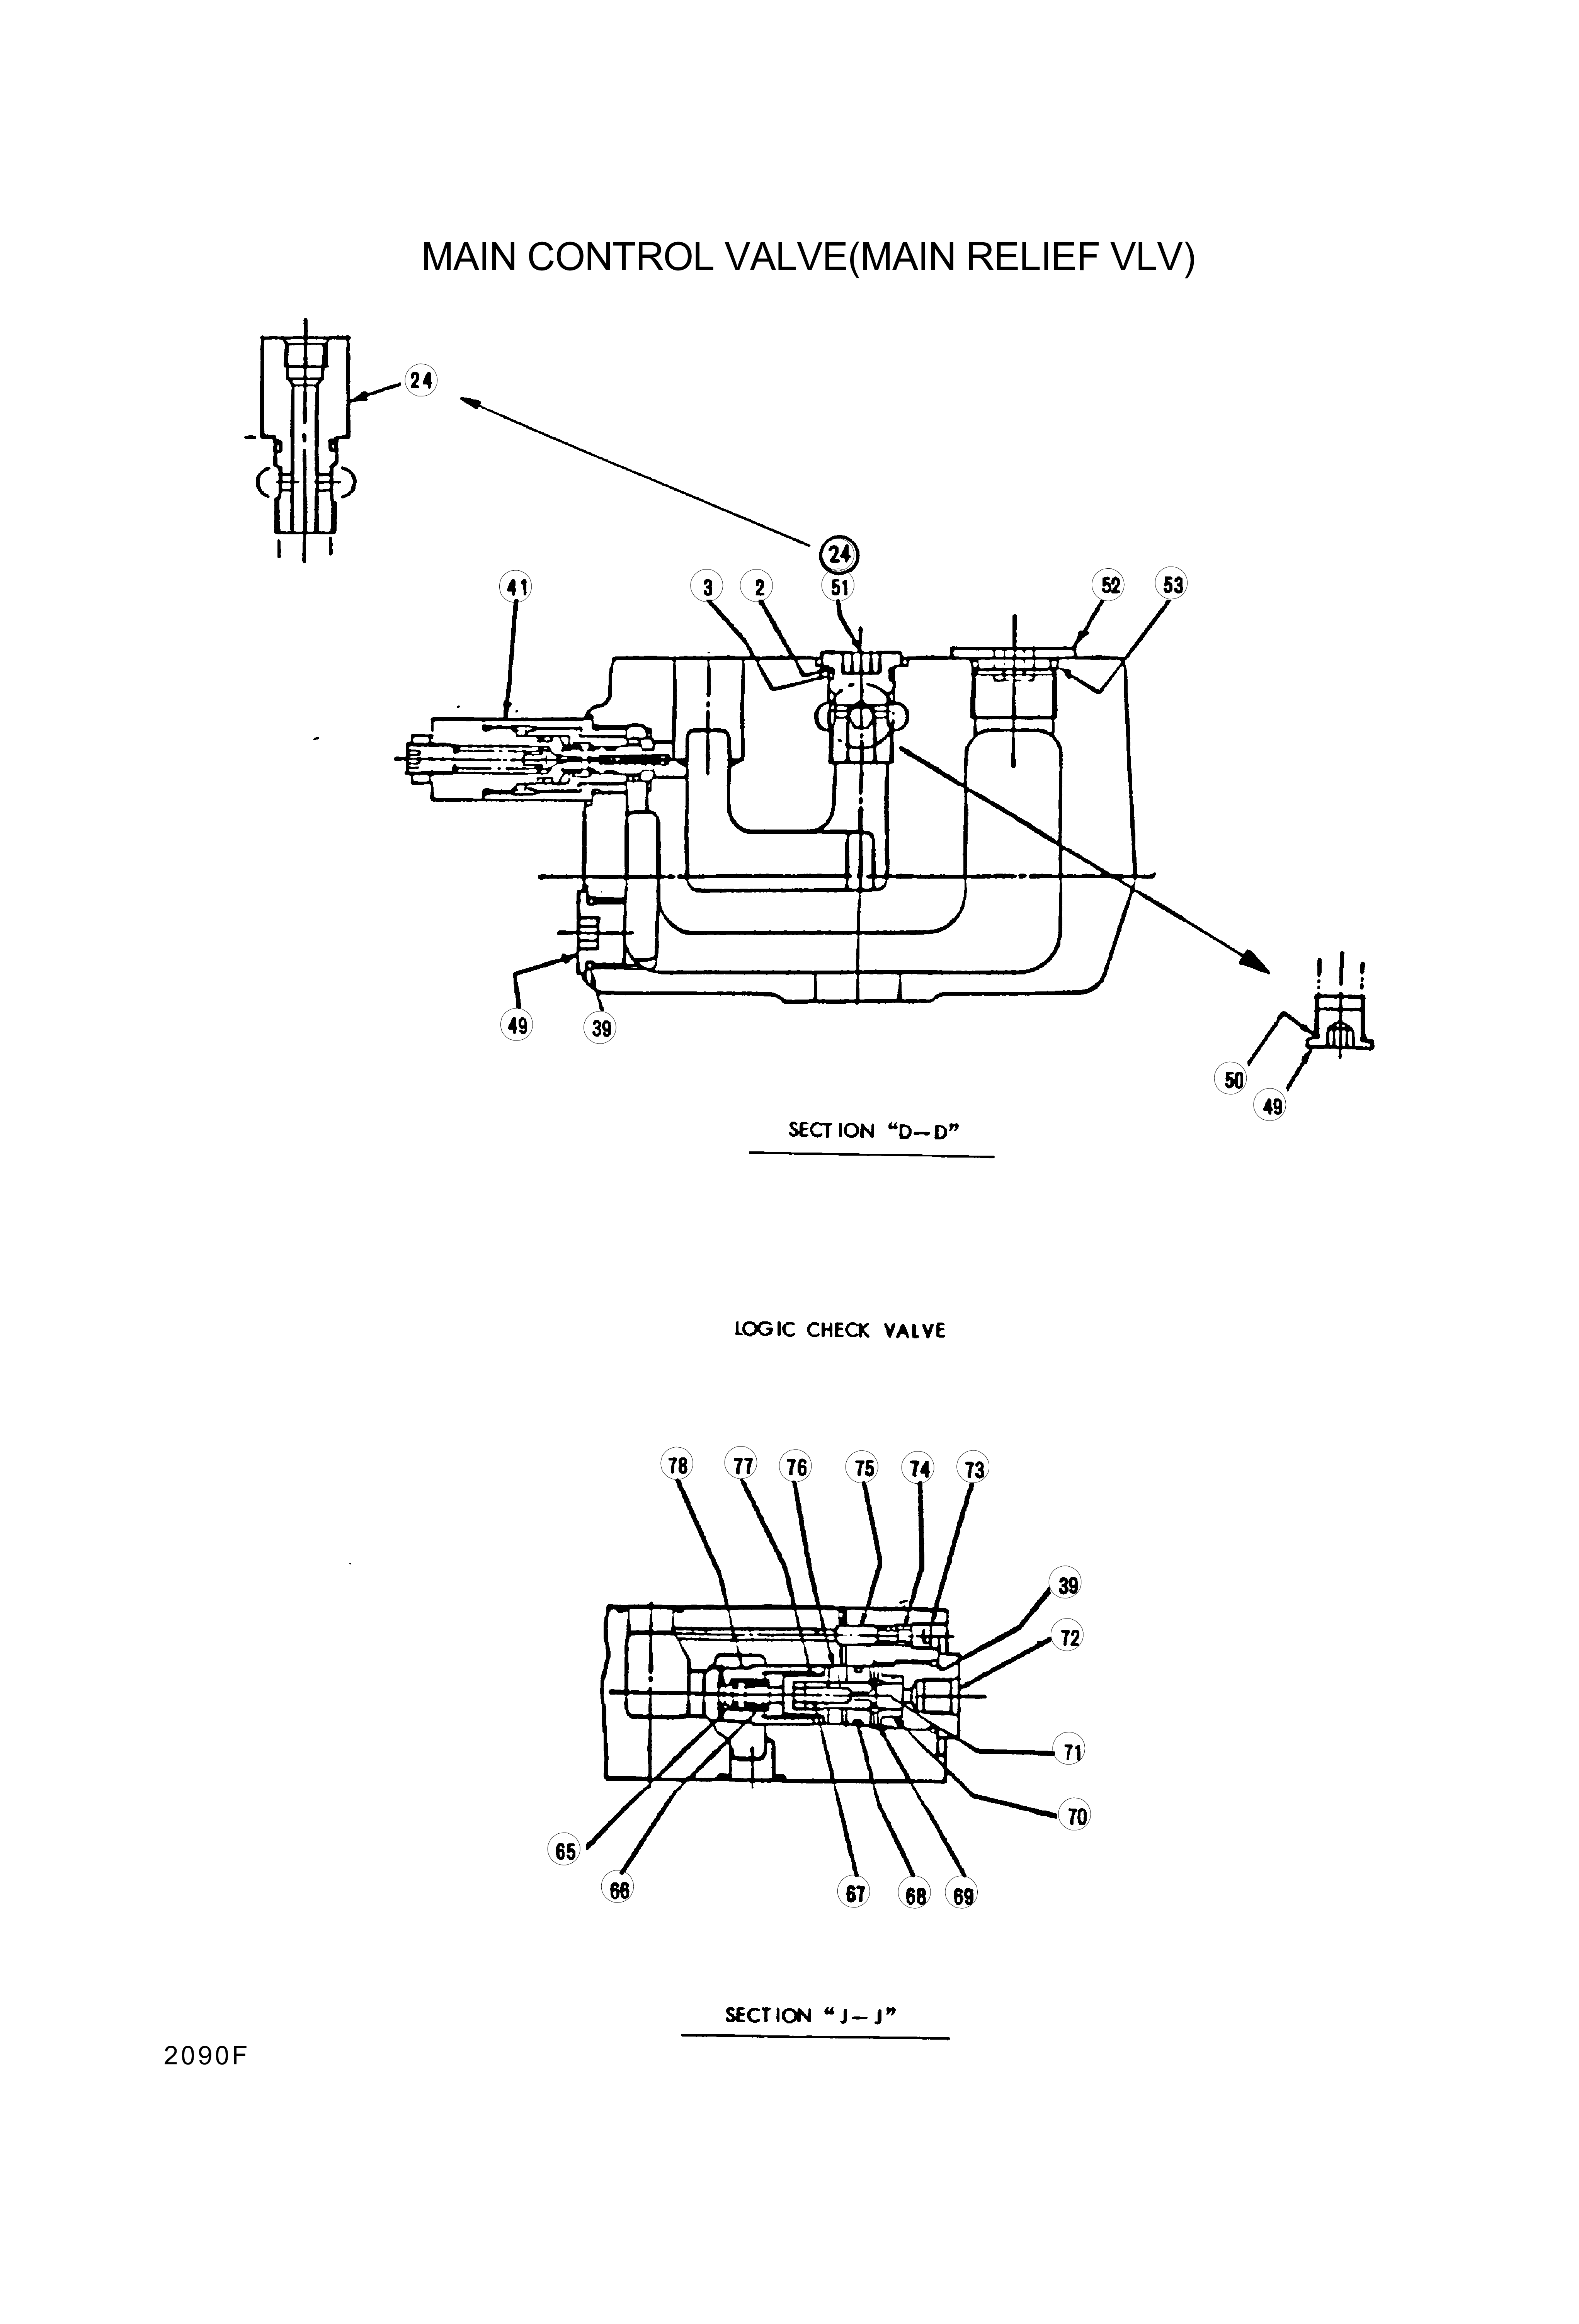 drawing for Hyundai Construction Equipment 3537-171-320K90 - MAIN RELIEF VALVE (figure 3)